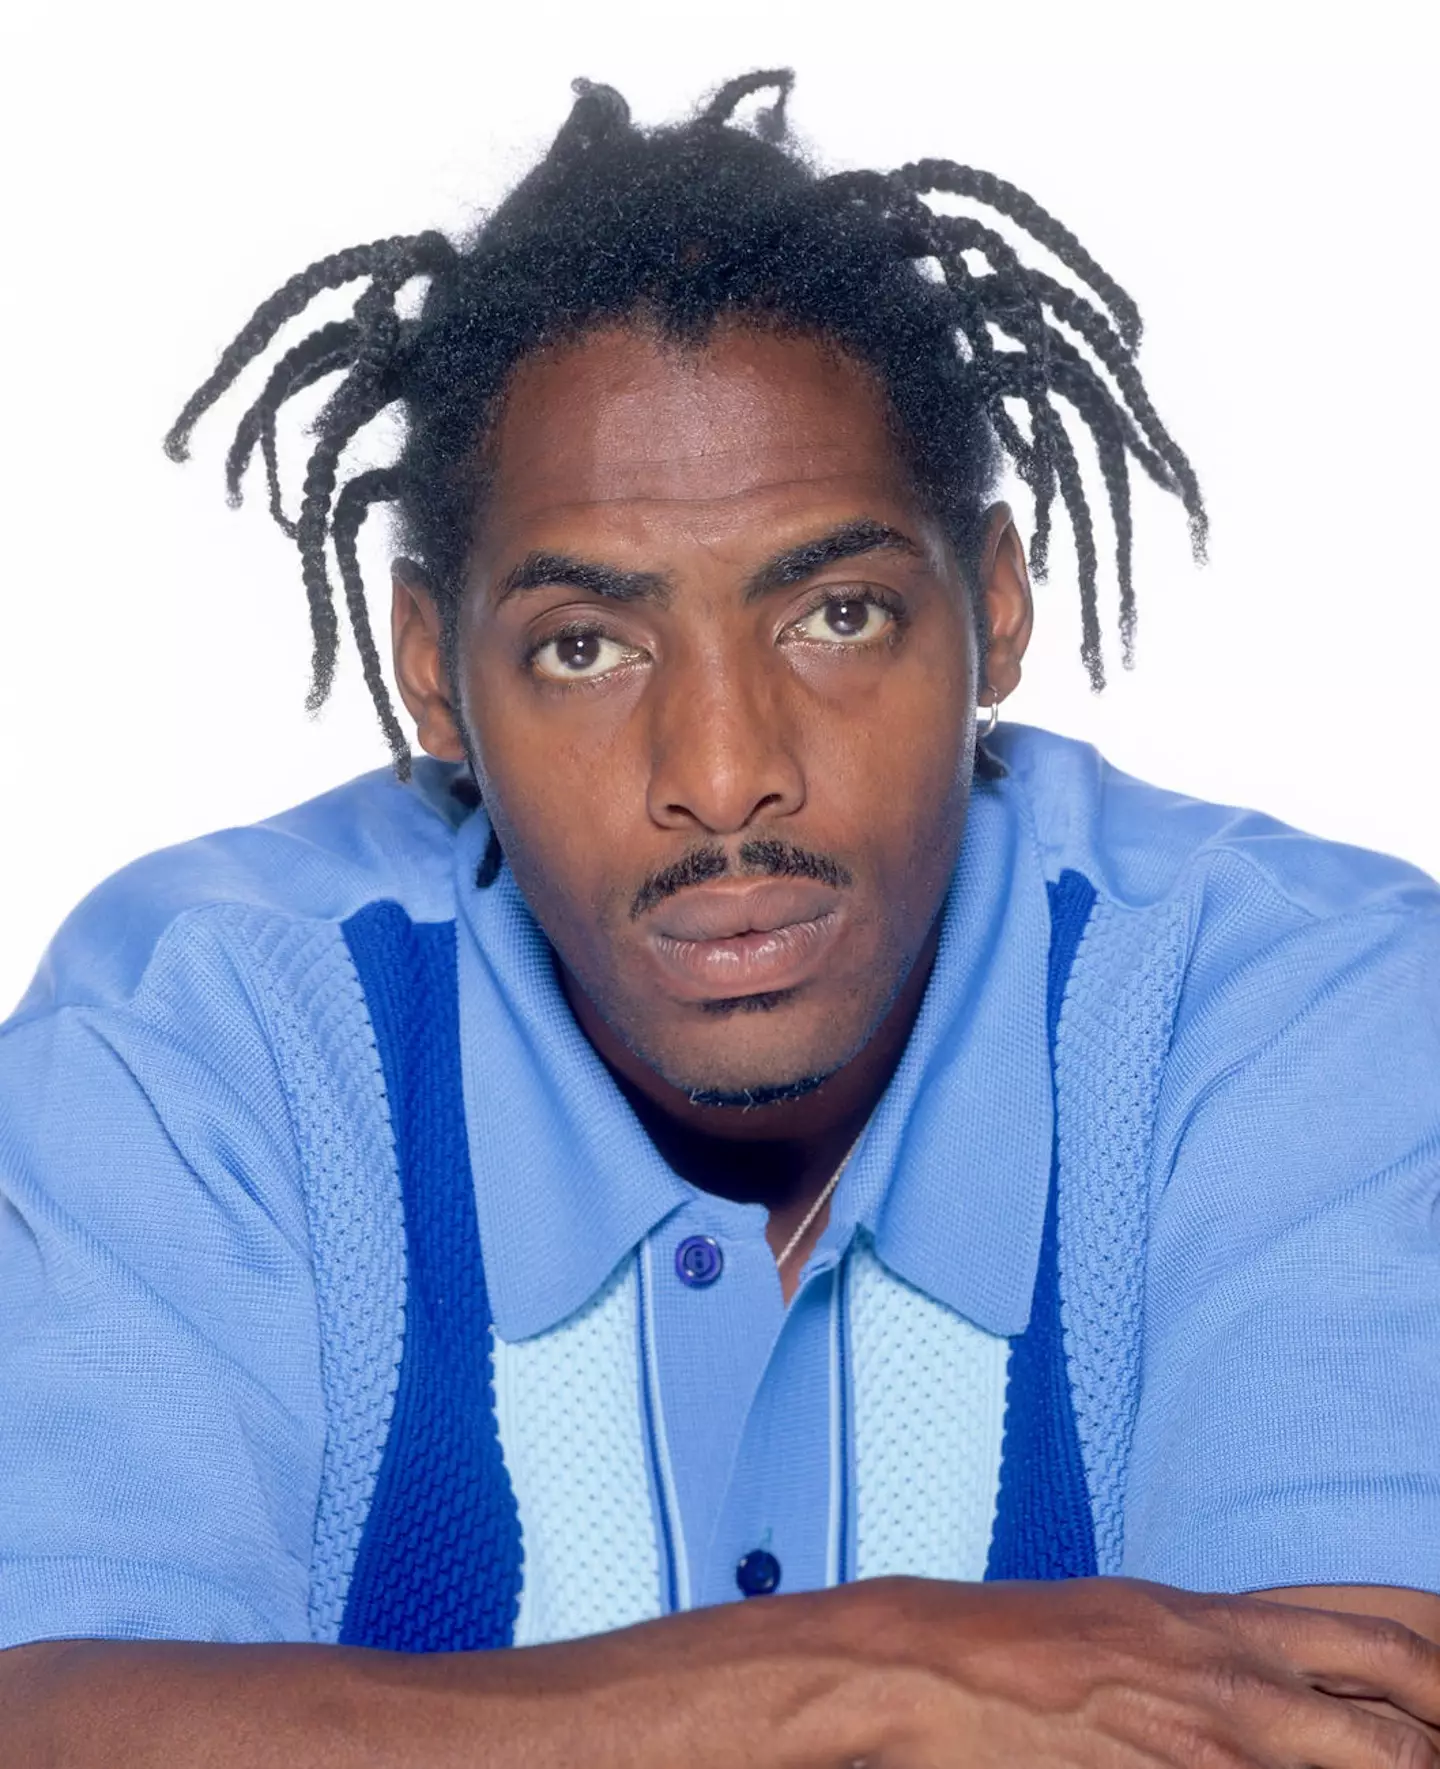 Coolio pictured in 1997.